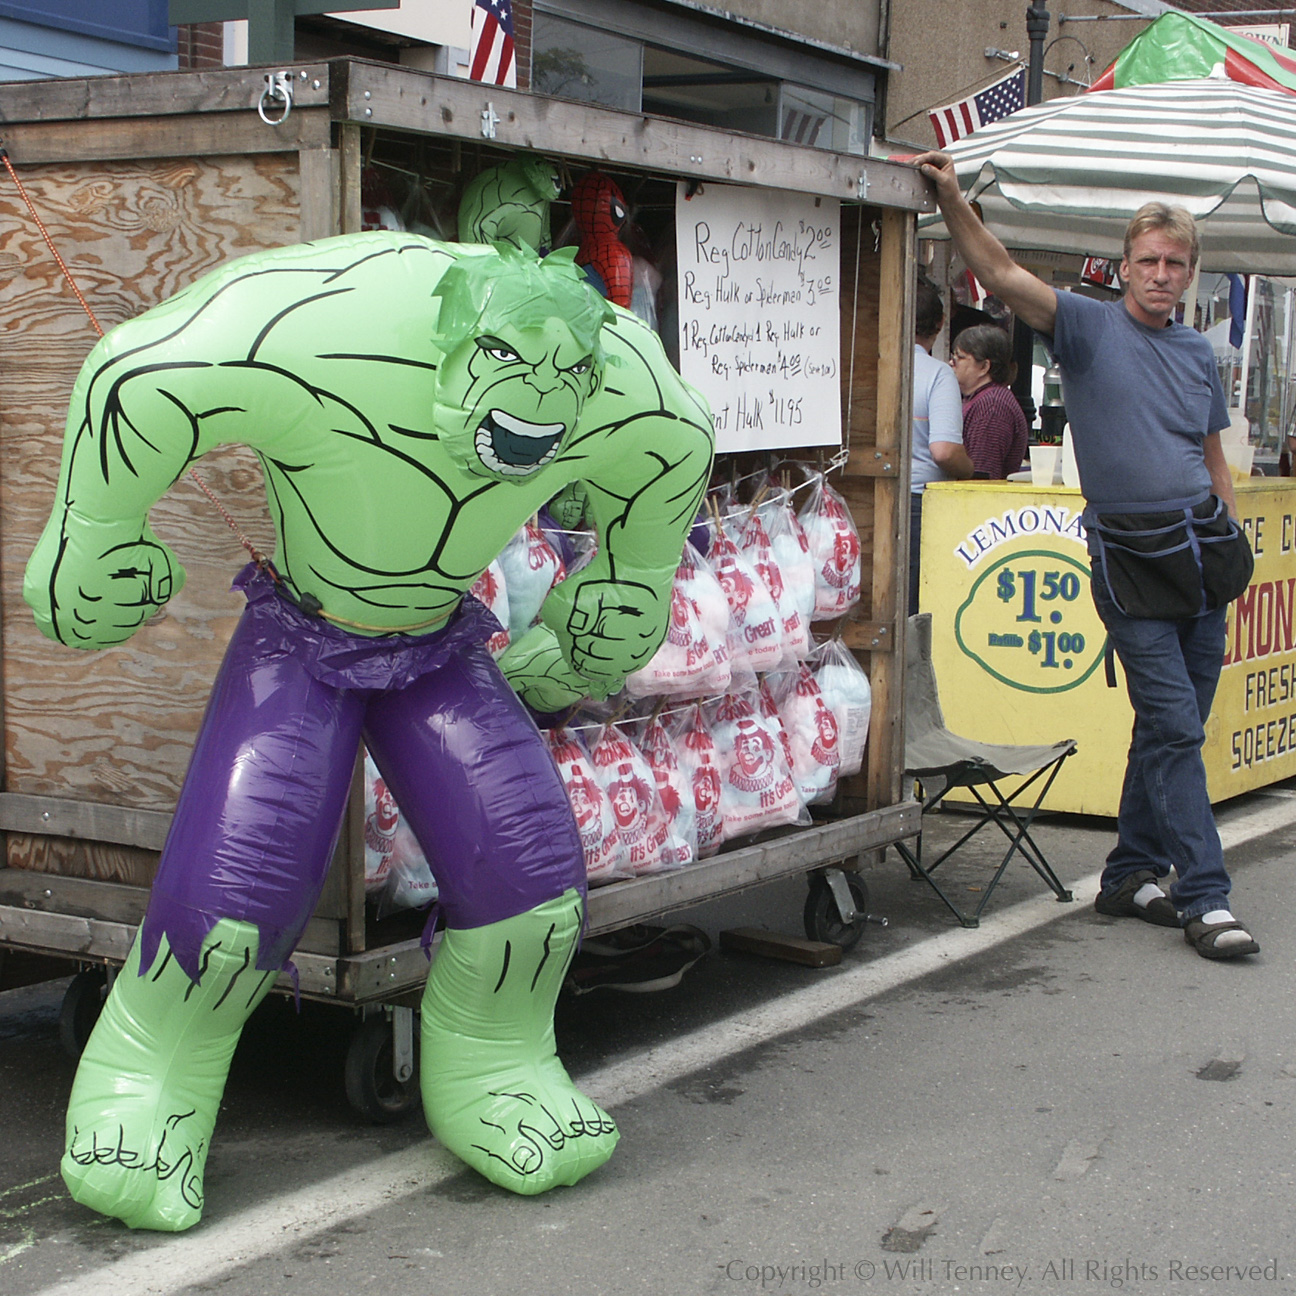 The Inflatable Hulk: Photograph by Will Tenney